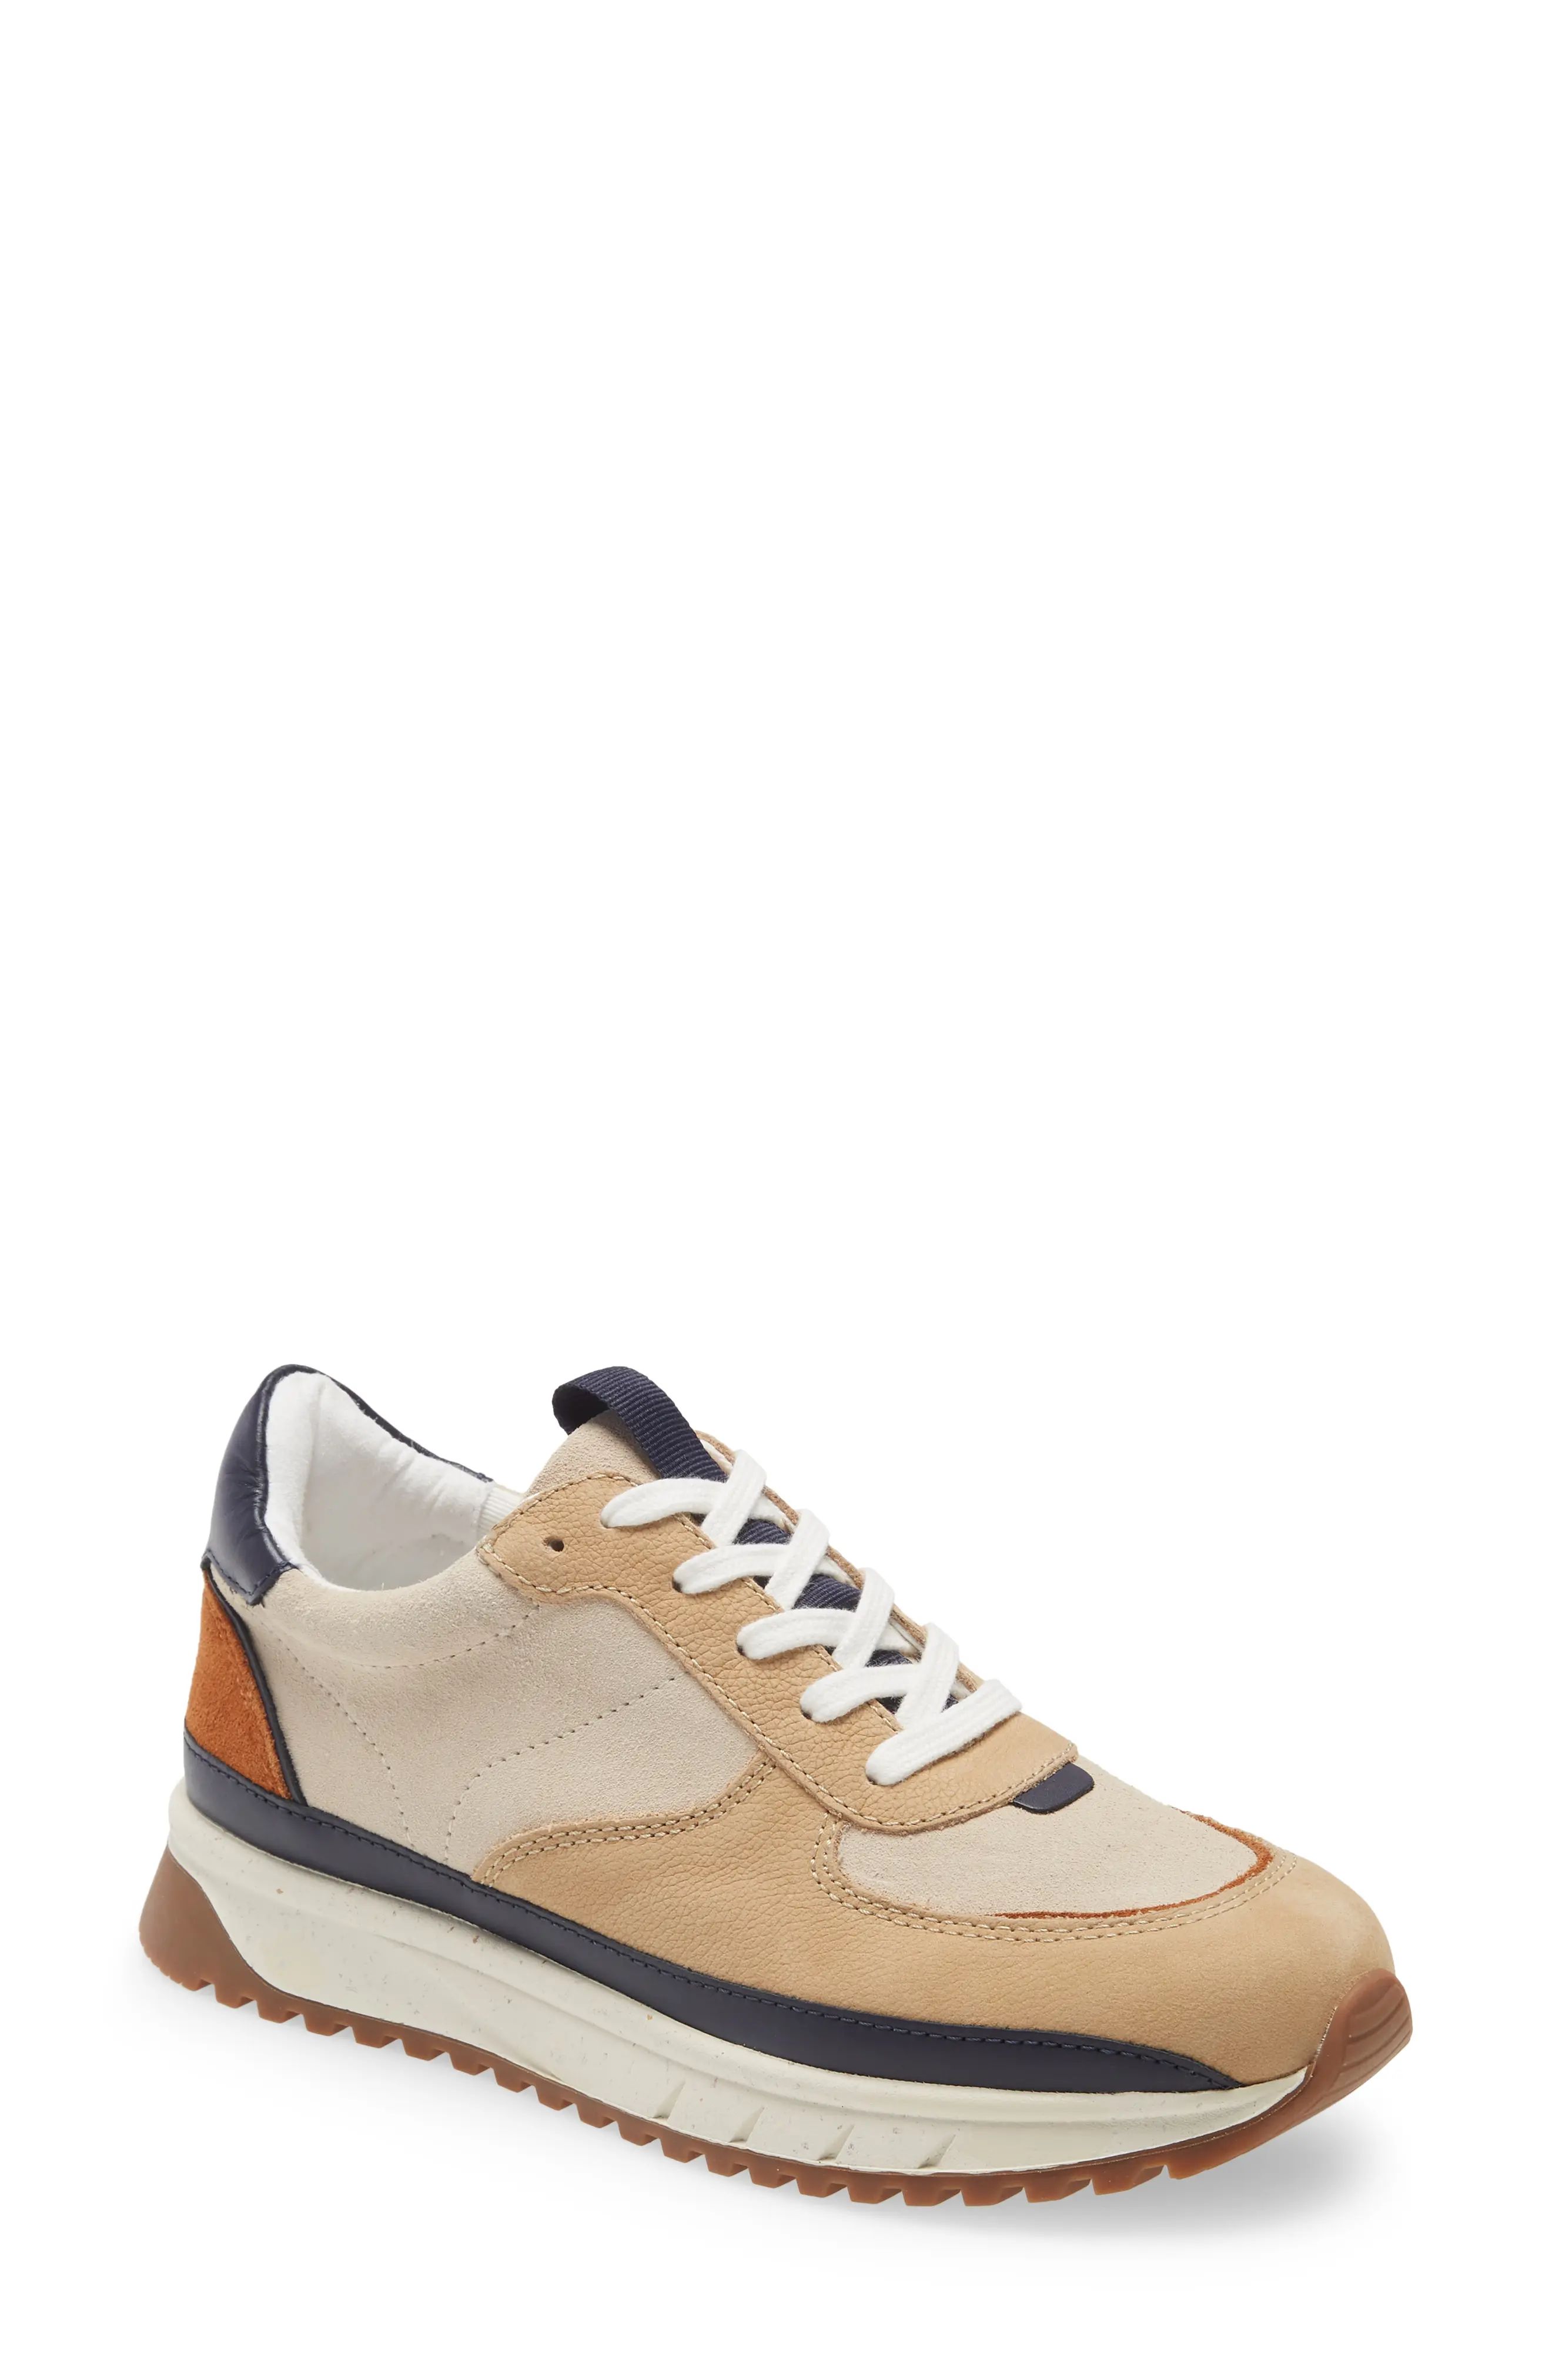 Madewell Kickoff Trainer Sneaker, Size 7.5 in Bone Multi at Nordstrom | Nordstrom